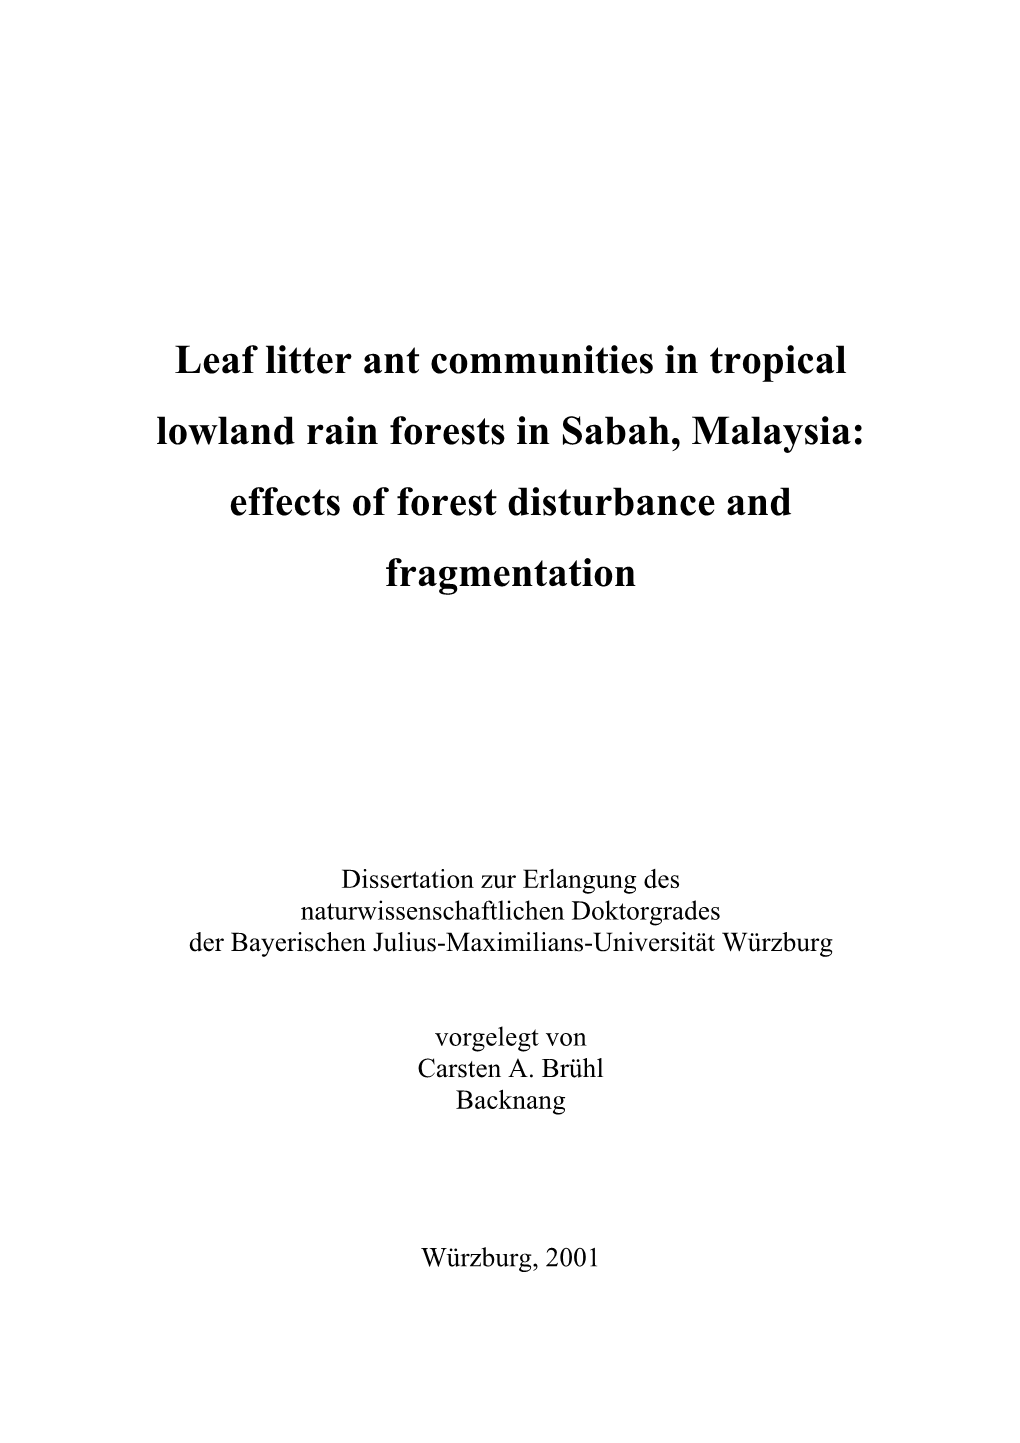 Leaf Litter Ant Communities in Tropical Lowland Rain Forests in Sabah, Malaysia: Effects of Forest Disturbance and Fragmentation